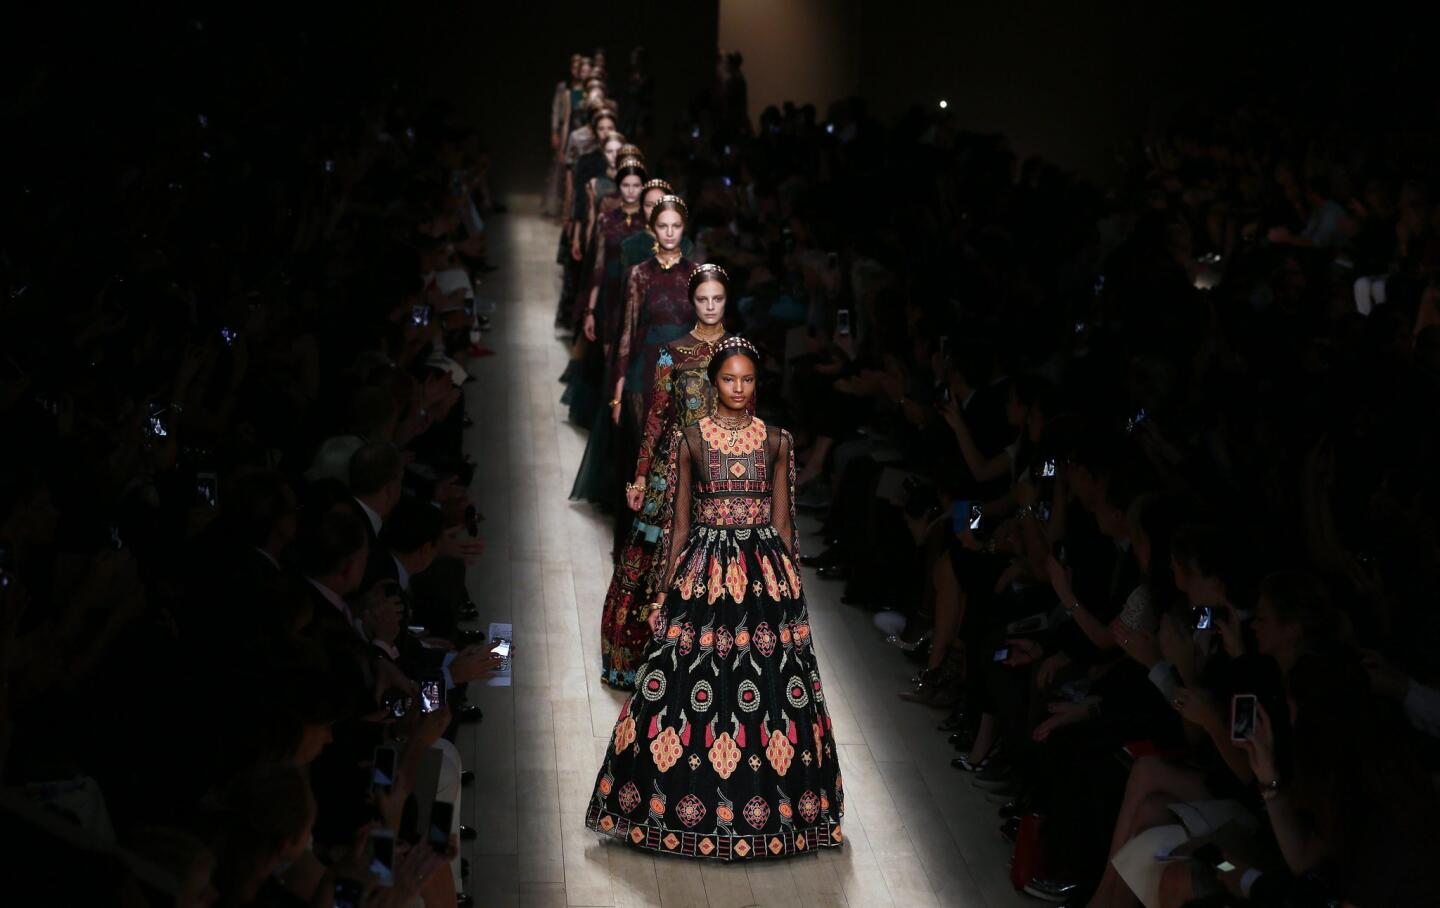 Creations from the spring/summer 2014 Valentino collection by designers Maria Grazia Chiuri and Pier Paolo are shown during Paris Fashion Week.